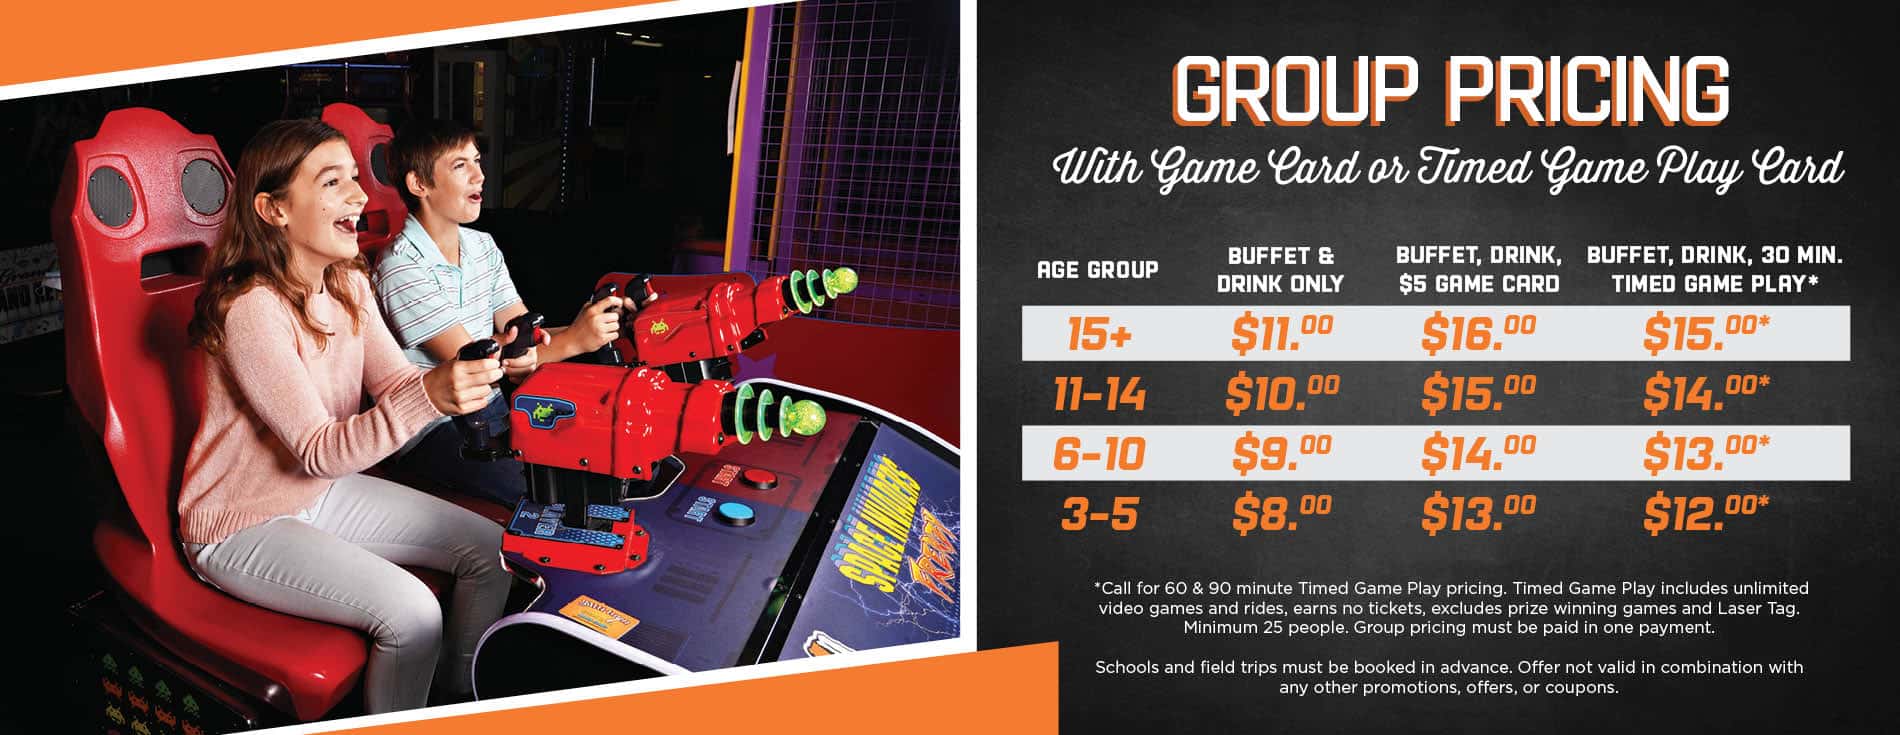 Evansville Group Pricing